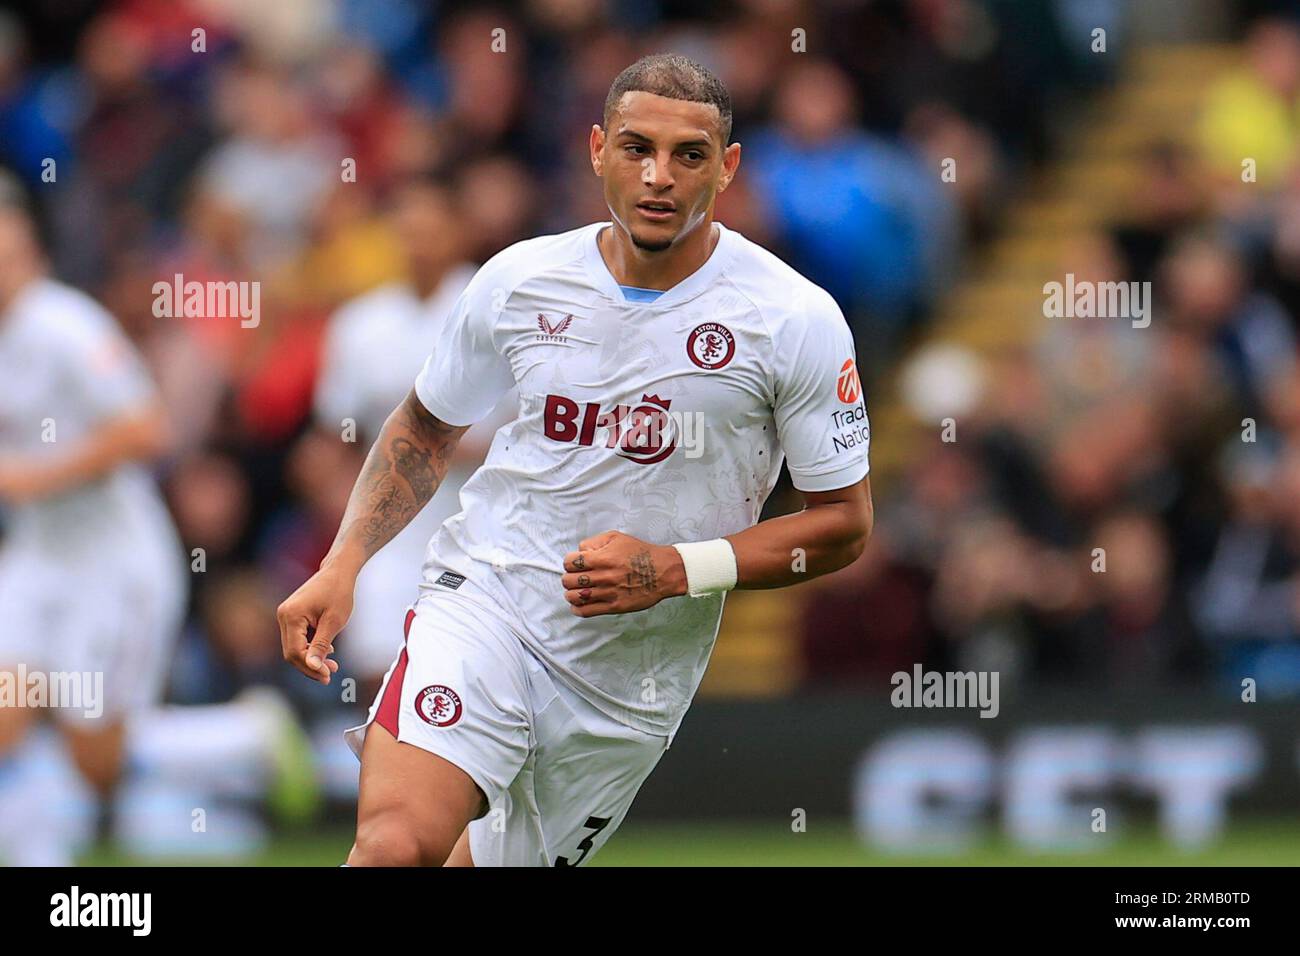 Diego Carlos #3 of Aston Villa during the Premier League match Burnley vs Aston Villa at Turf Moor, Burnley, United Kingdom, 27th August 2023 (Photo by Conor Molloy/News Images Stock Photo